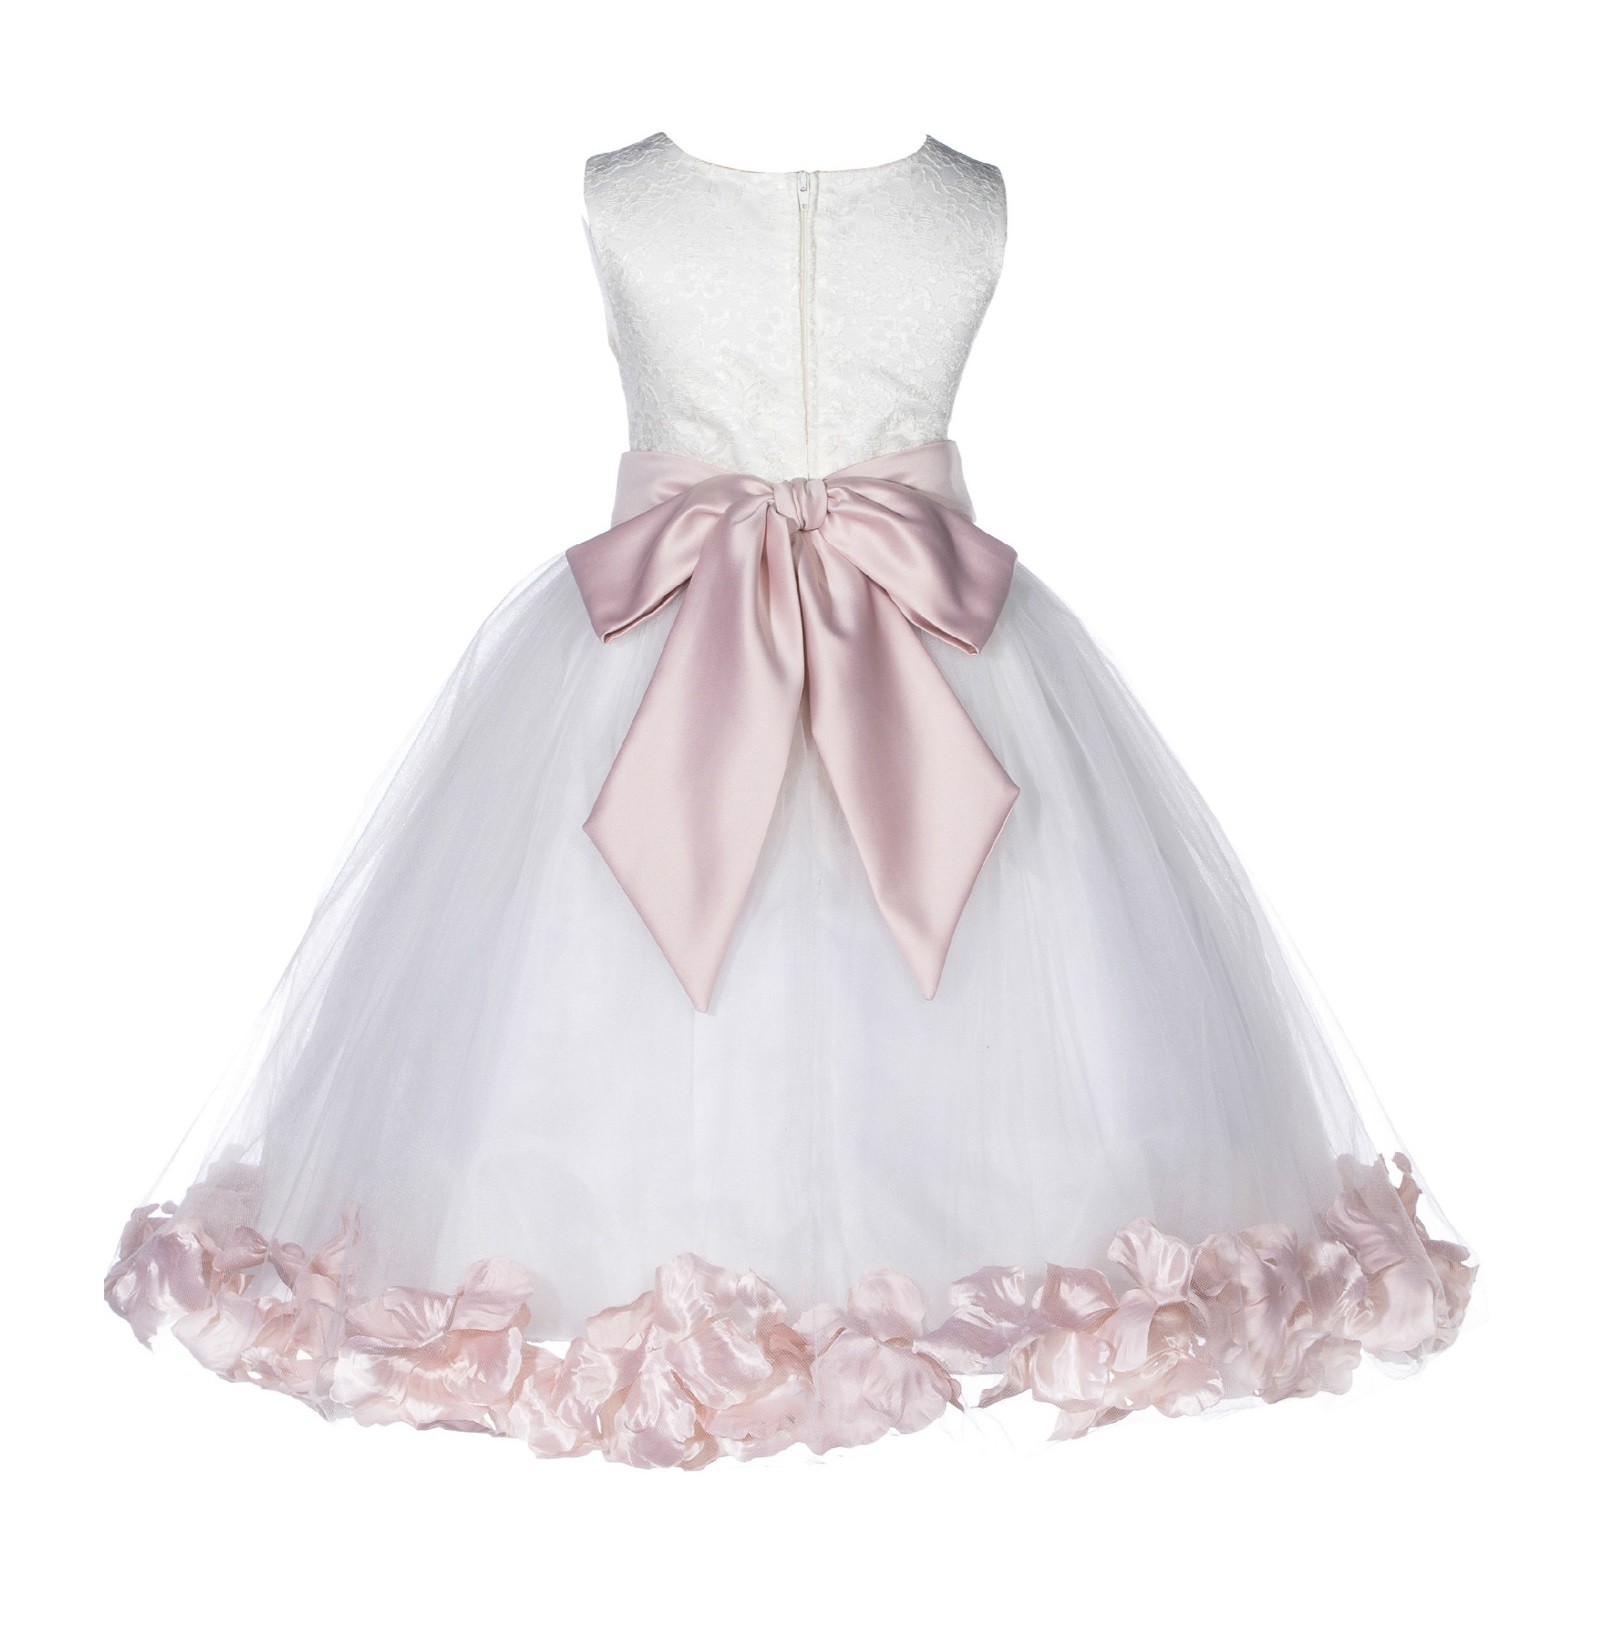 Ivory/Blush Lace Top Tulle Floral Petals Flower Girl Dress 165S